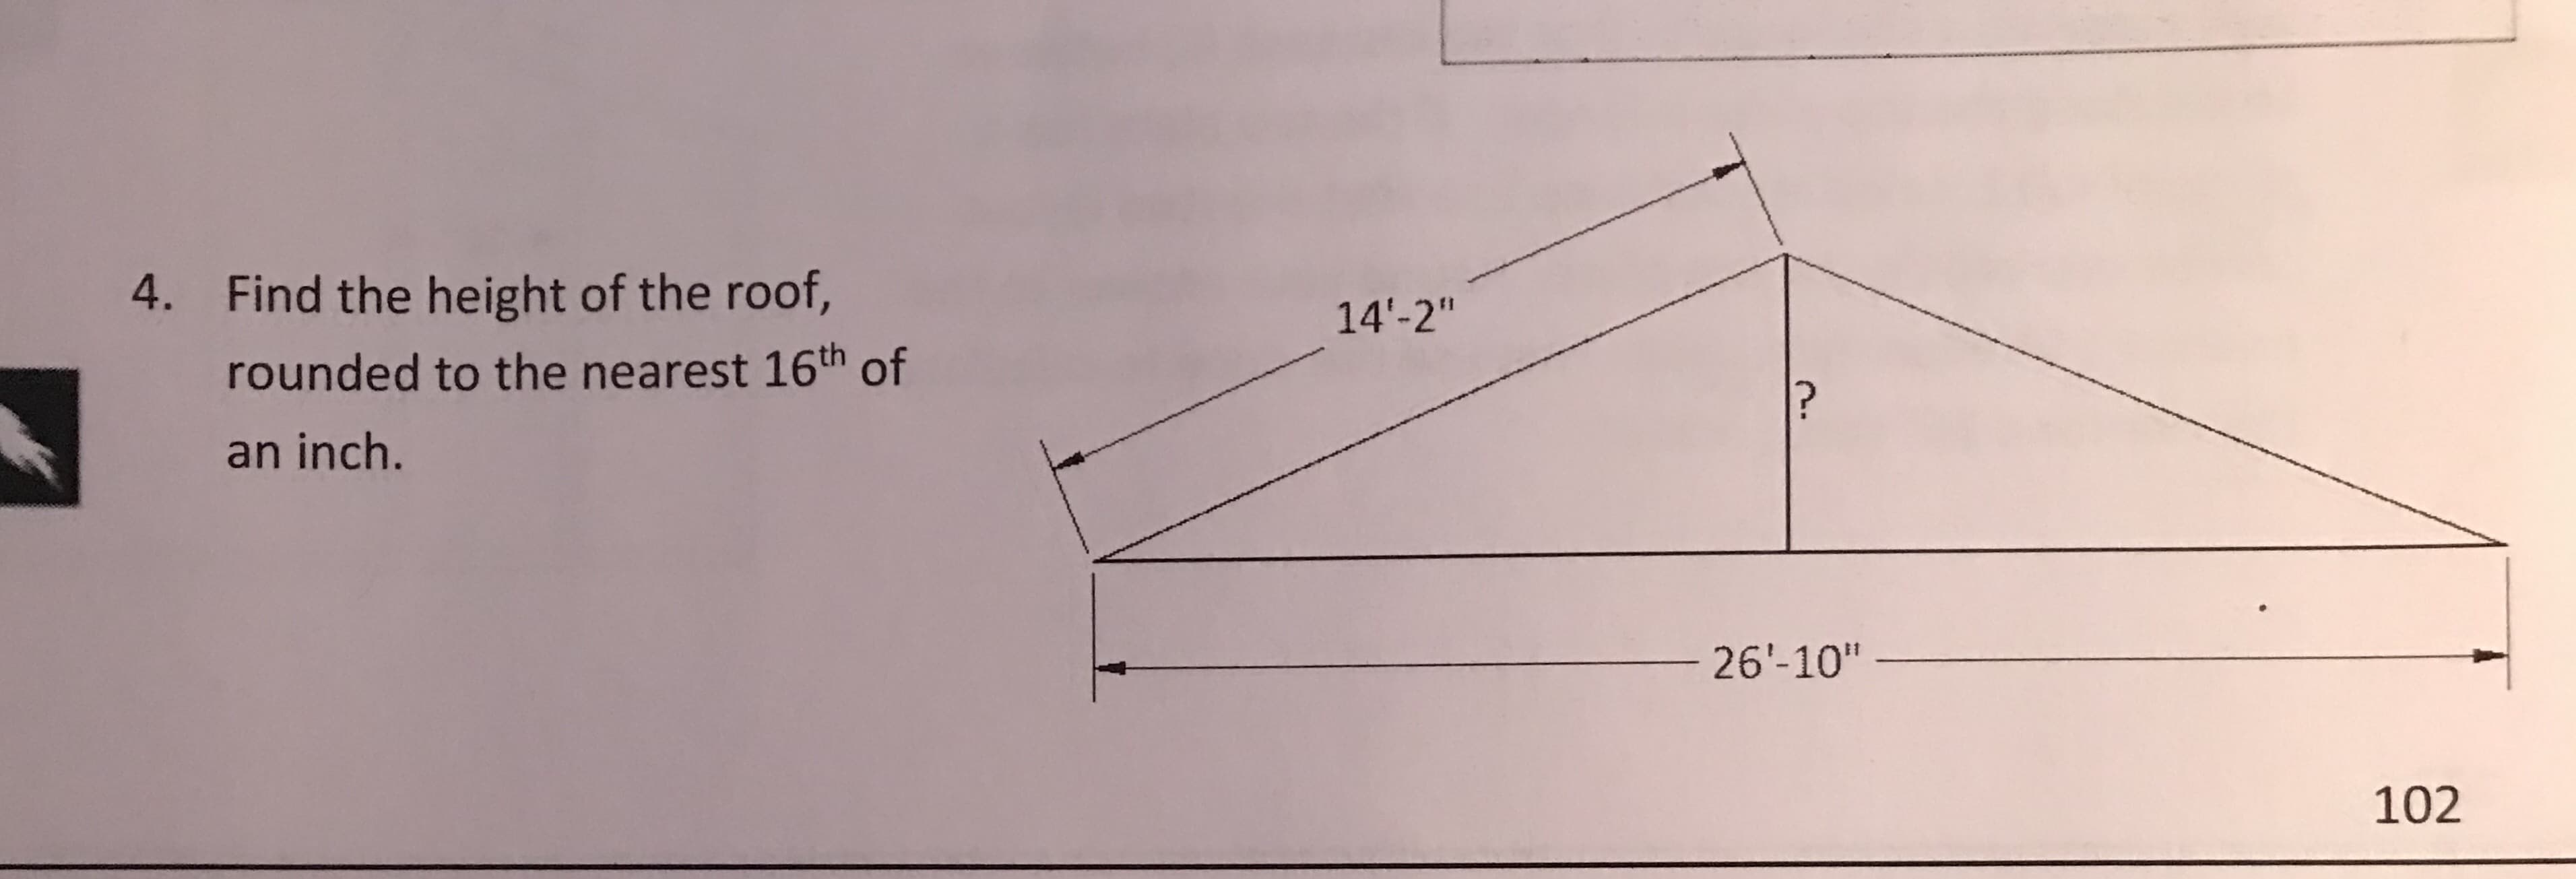 Find the height of the roof,
rounded to the nearest 16th of
an inch.
4.
14'-2"
26'-10'"
102
